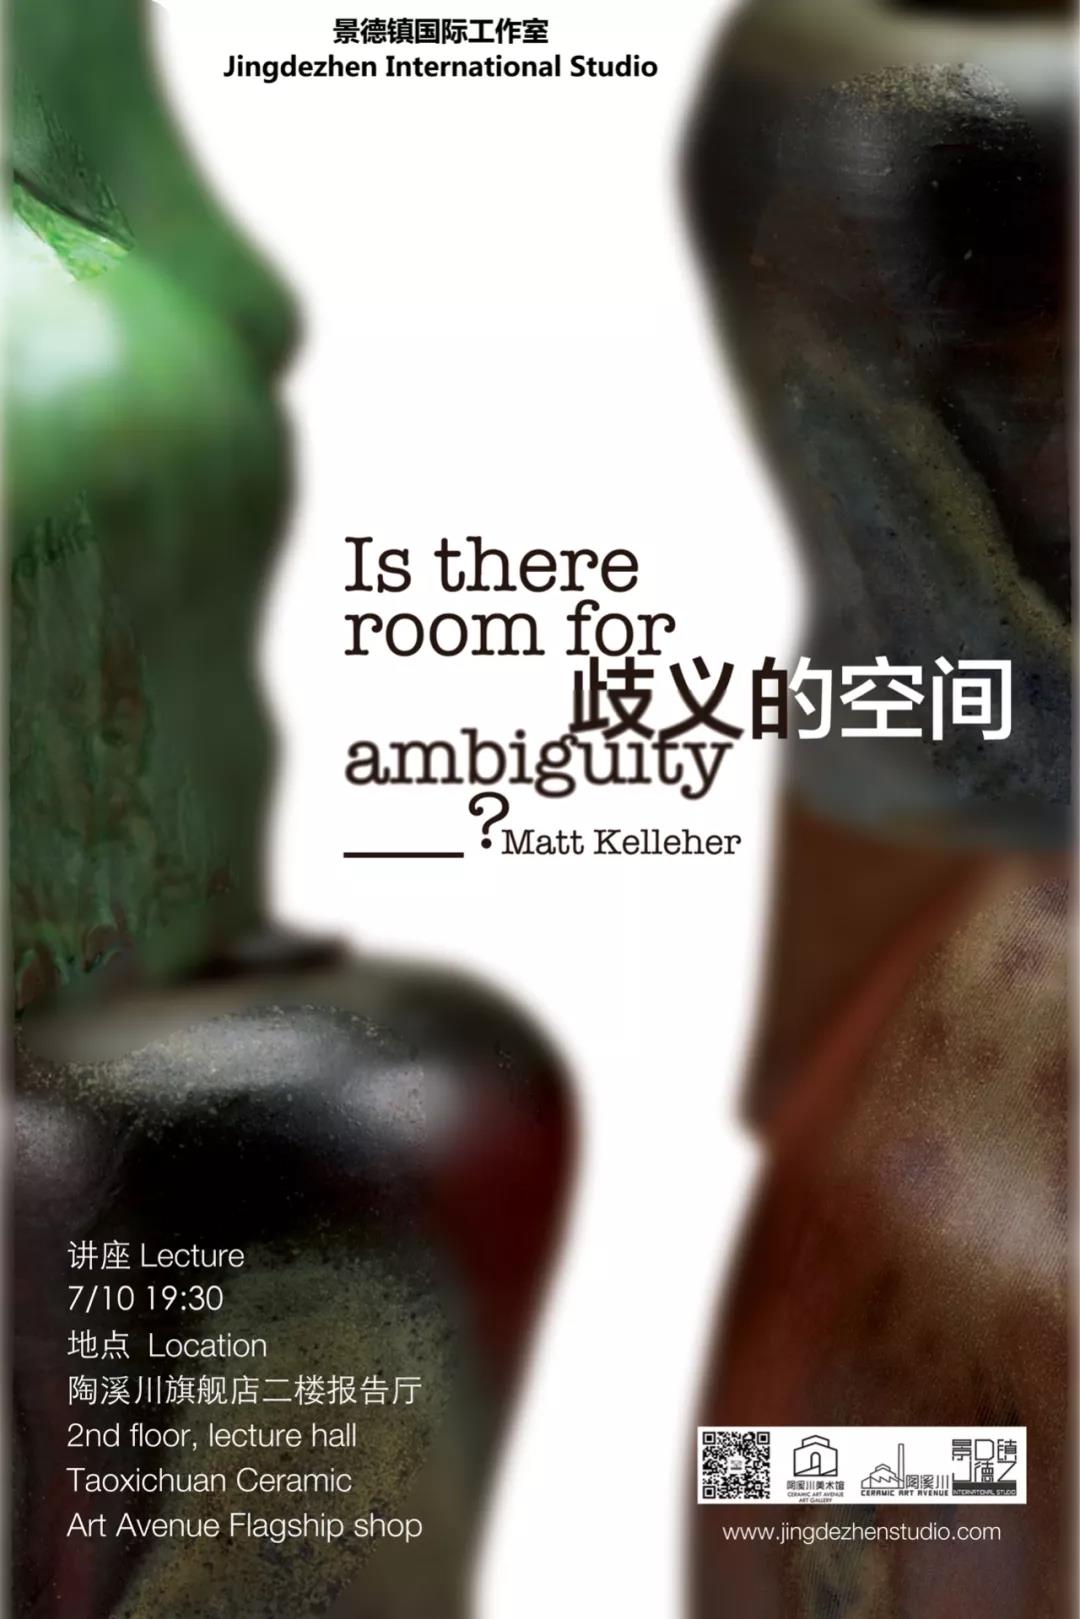 ＂Is There Room for Ambiguity?＂ 